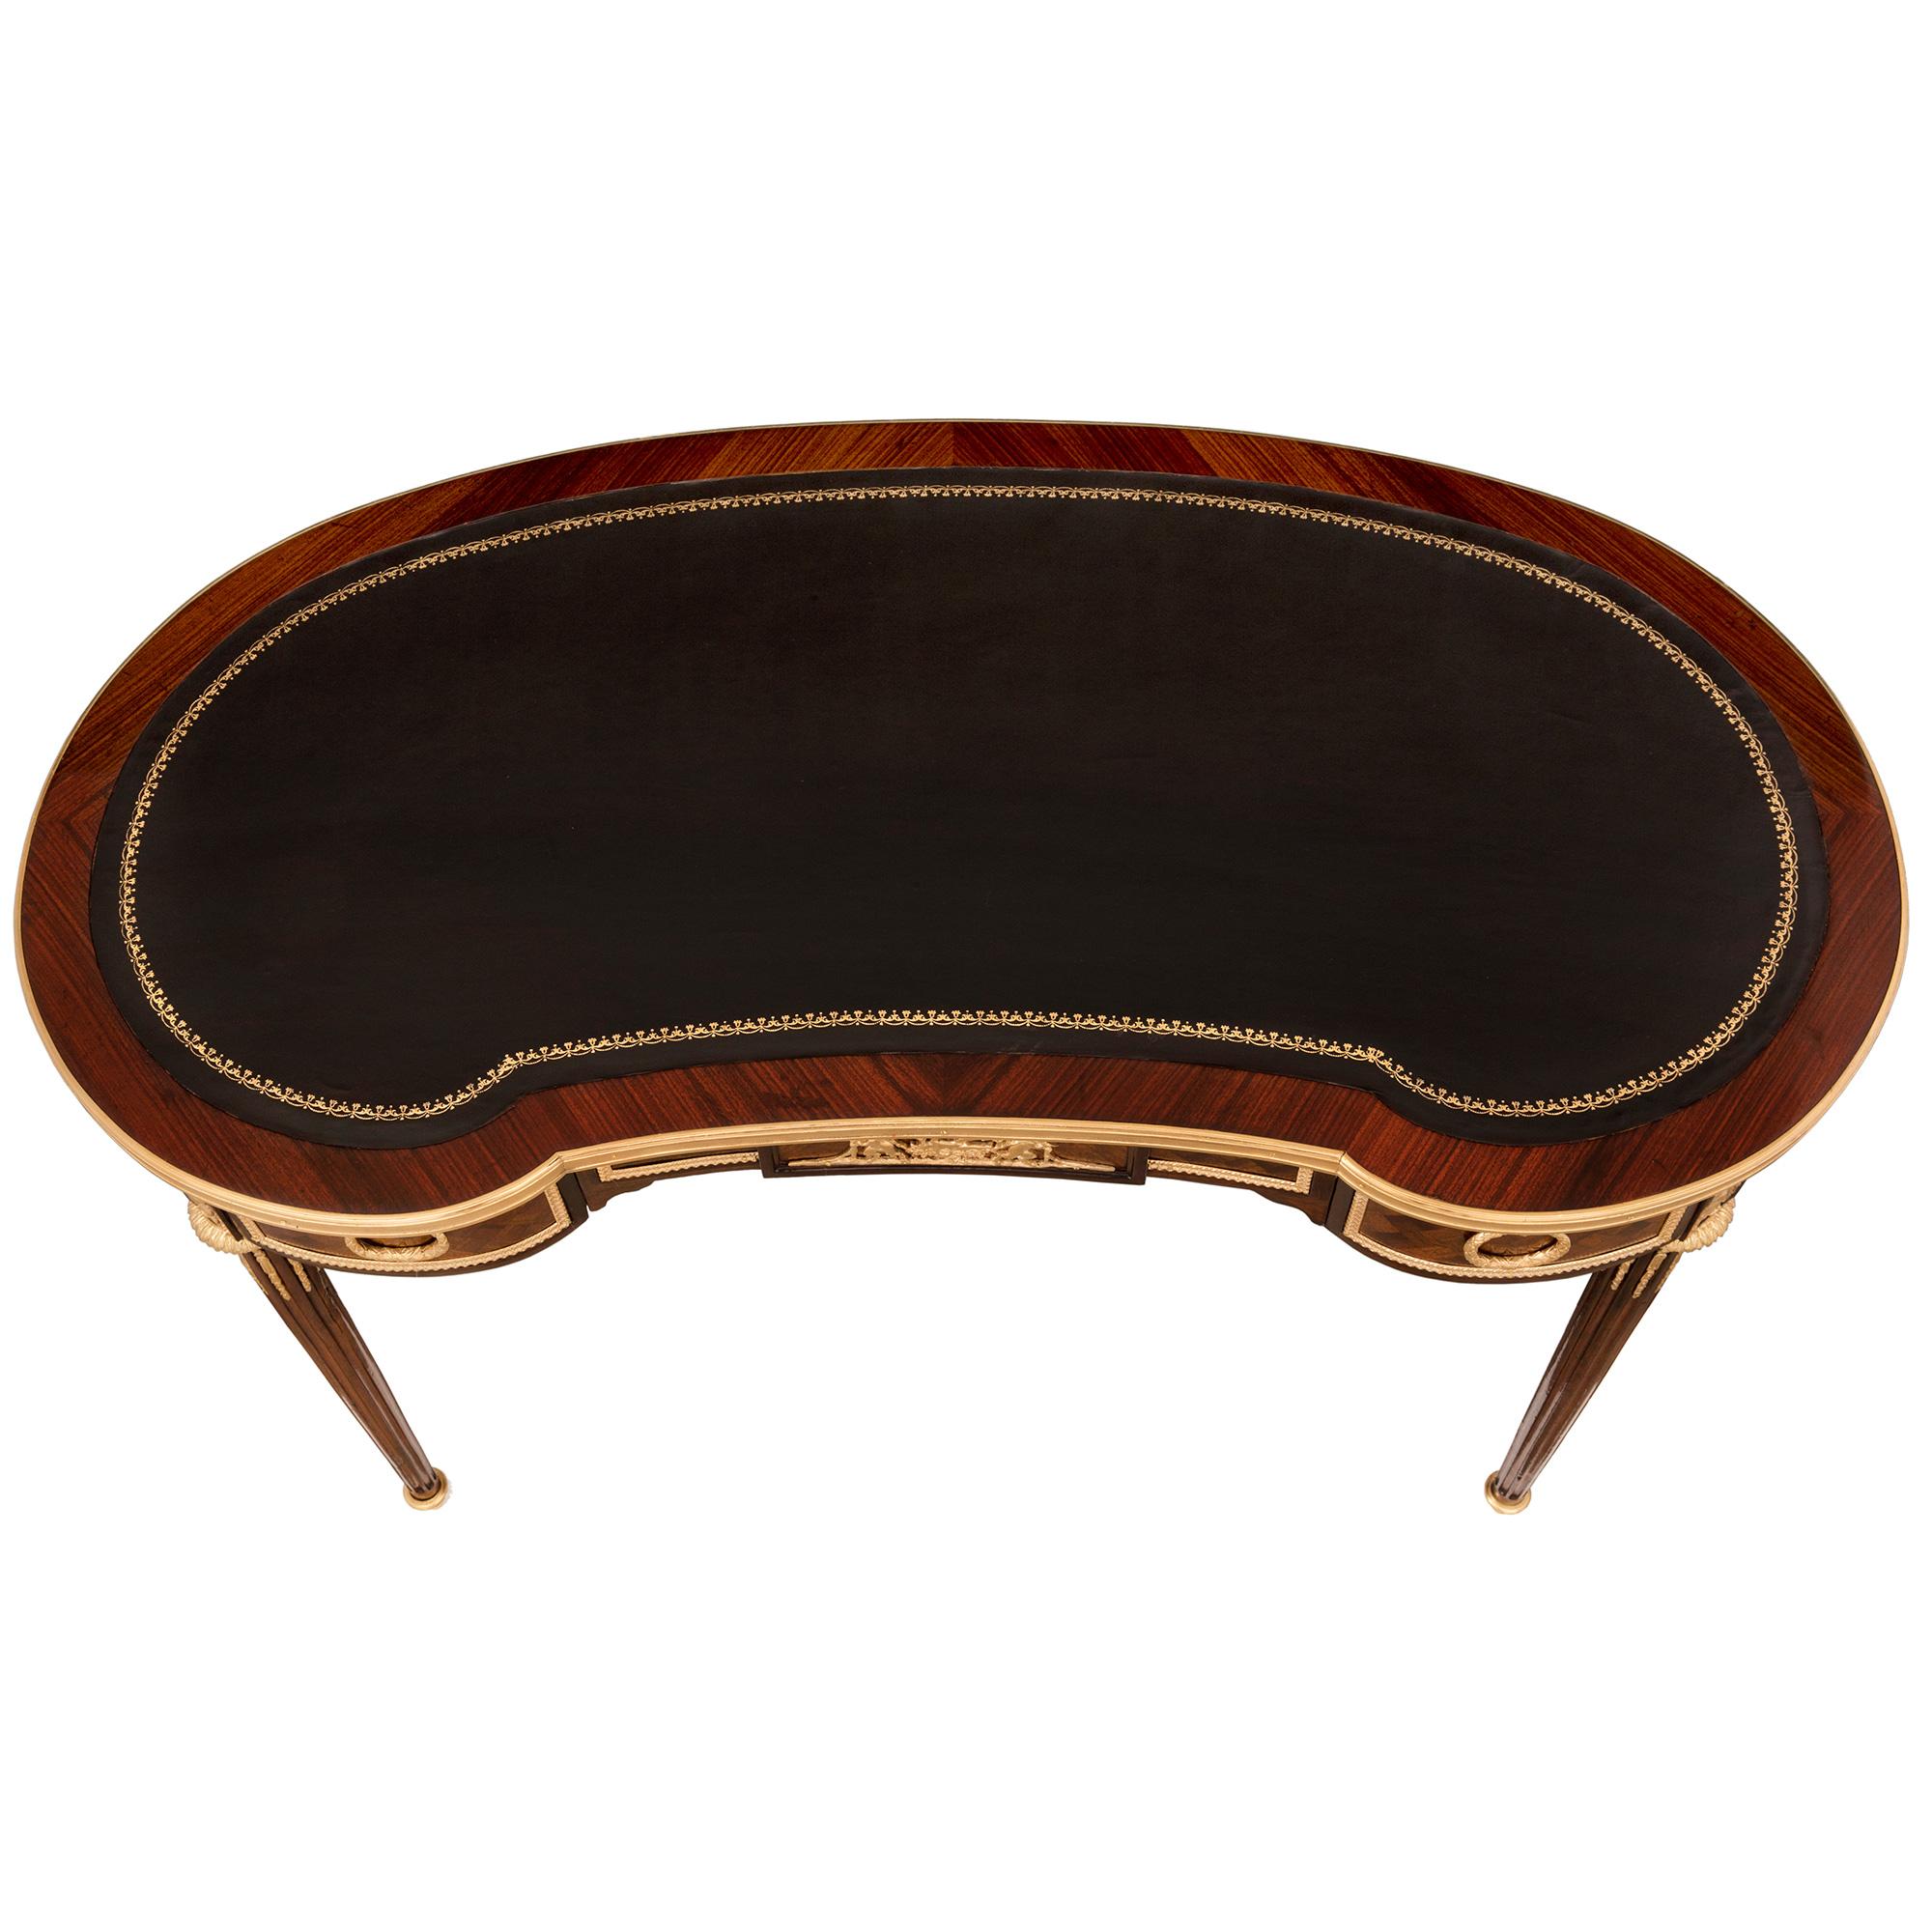 An elegant French 19th century Louis XVI st. mahogany, kingwood and ormolu kidney shaped writing desk. The desk is raised by slender circular tapered fluted legs with fine foliate topie shaped sabots, foliate top caps and richly chased fitted